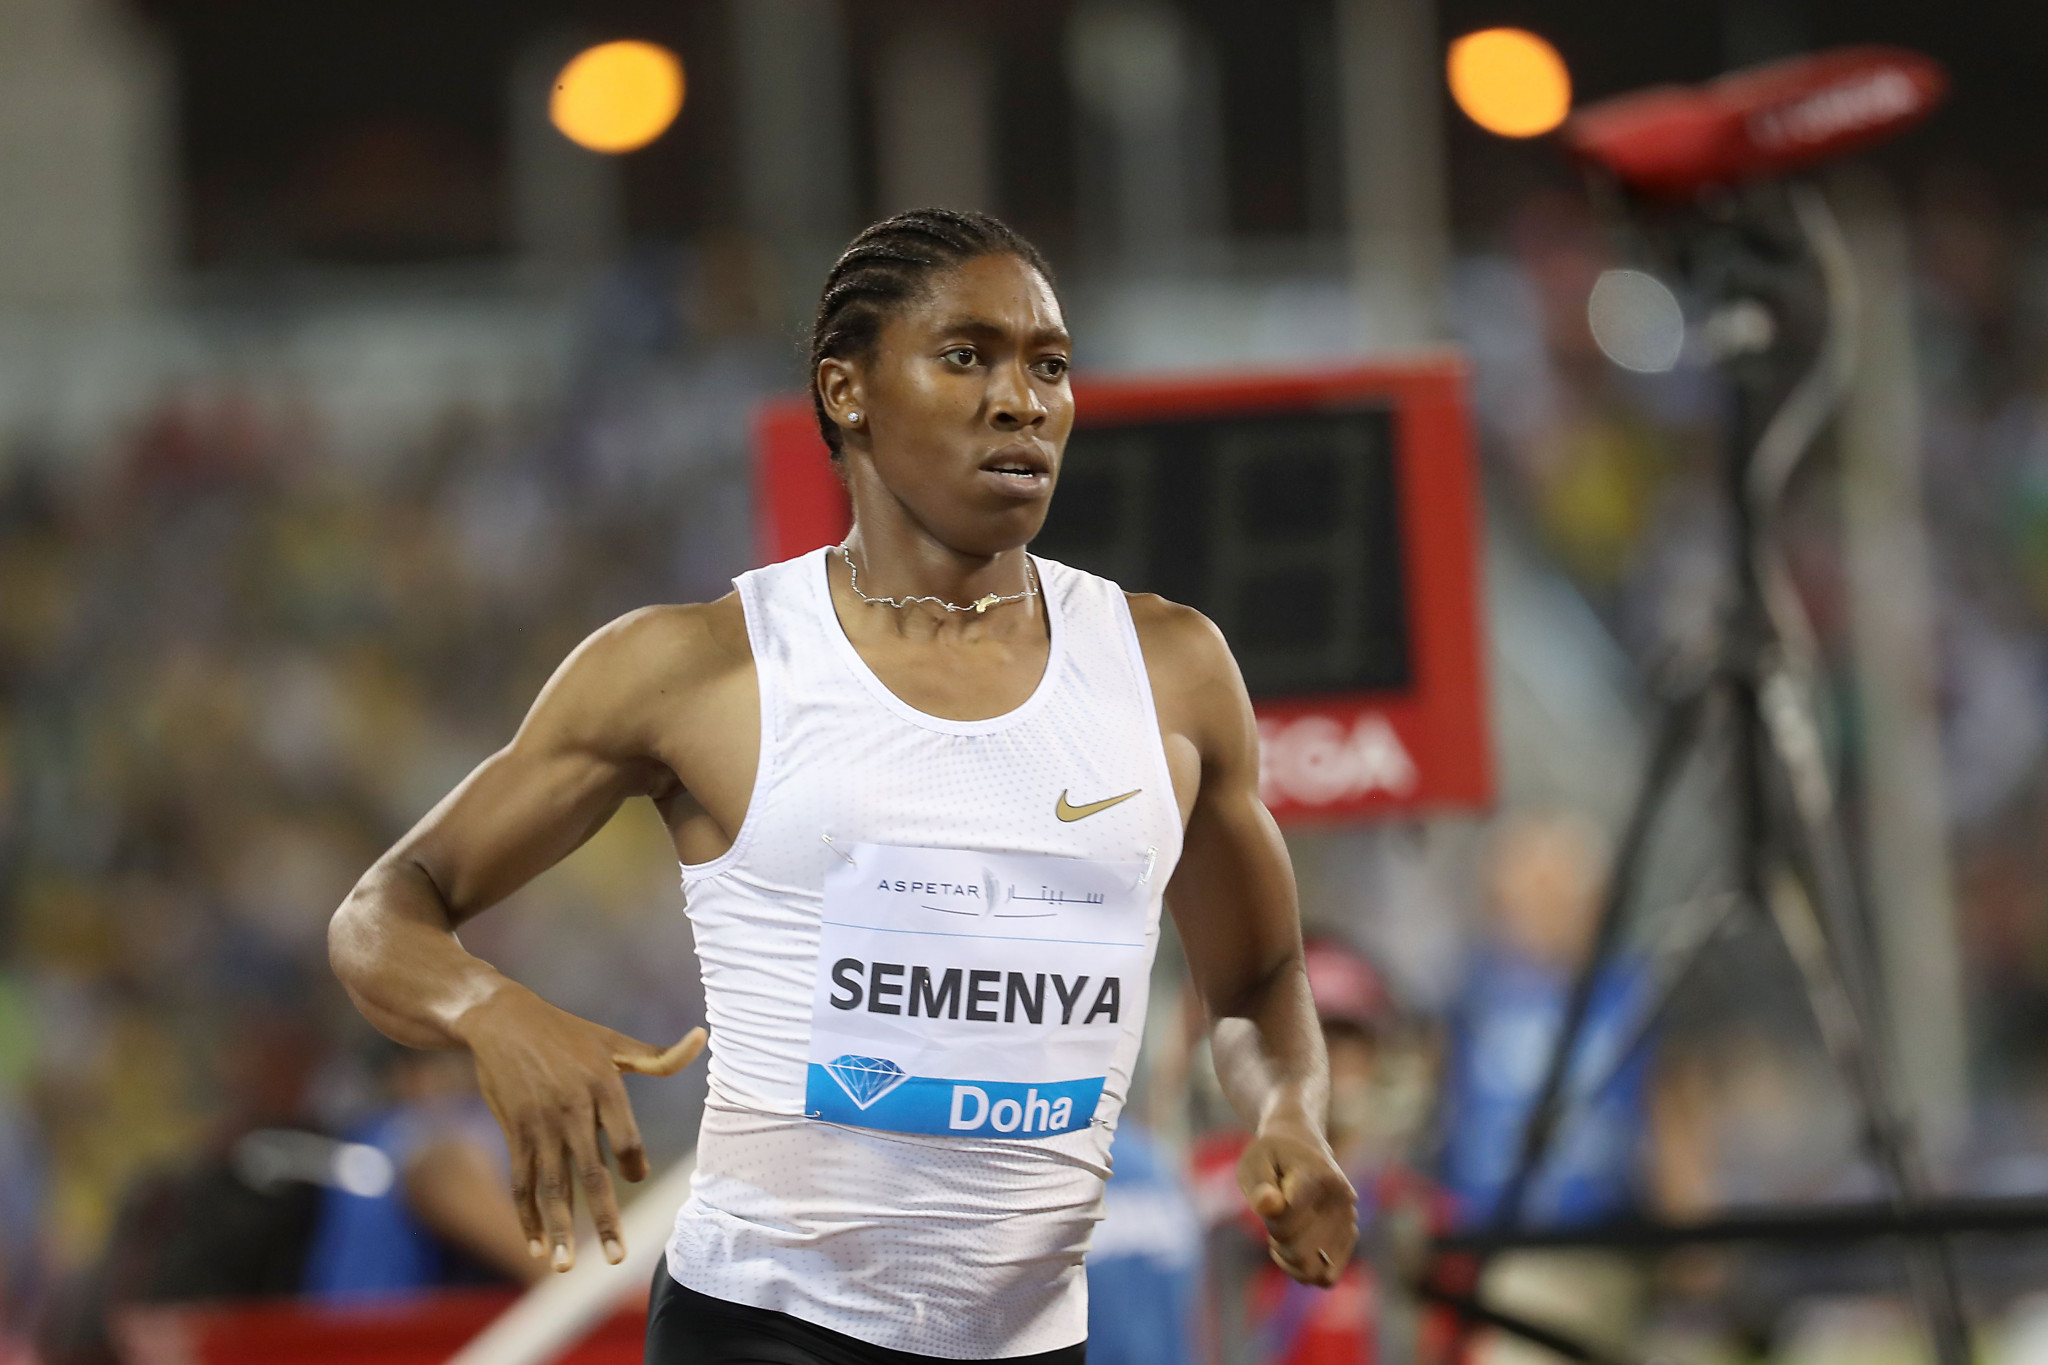 The rules could have a profound impact on the career of Caster Semenya ©Getty Images